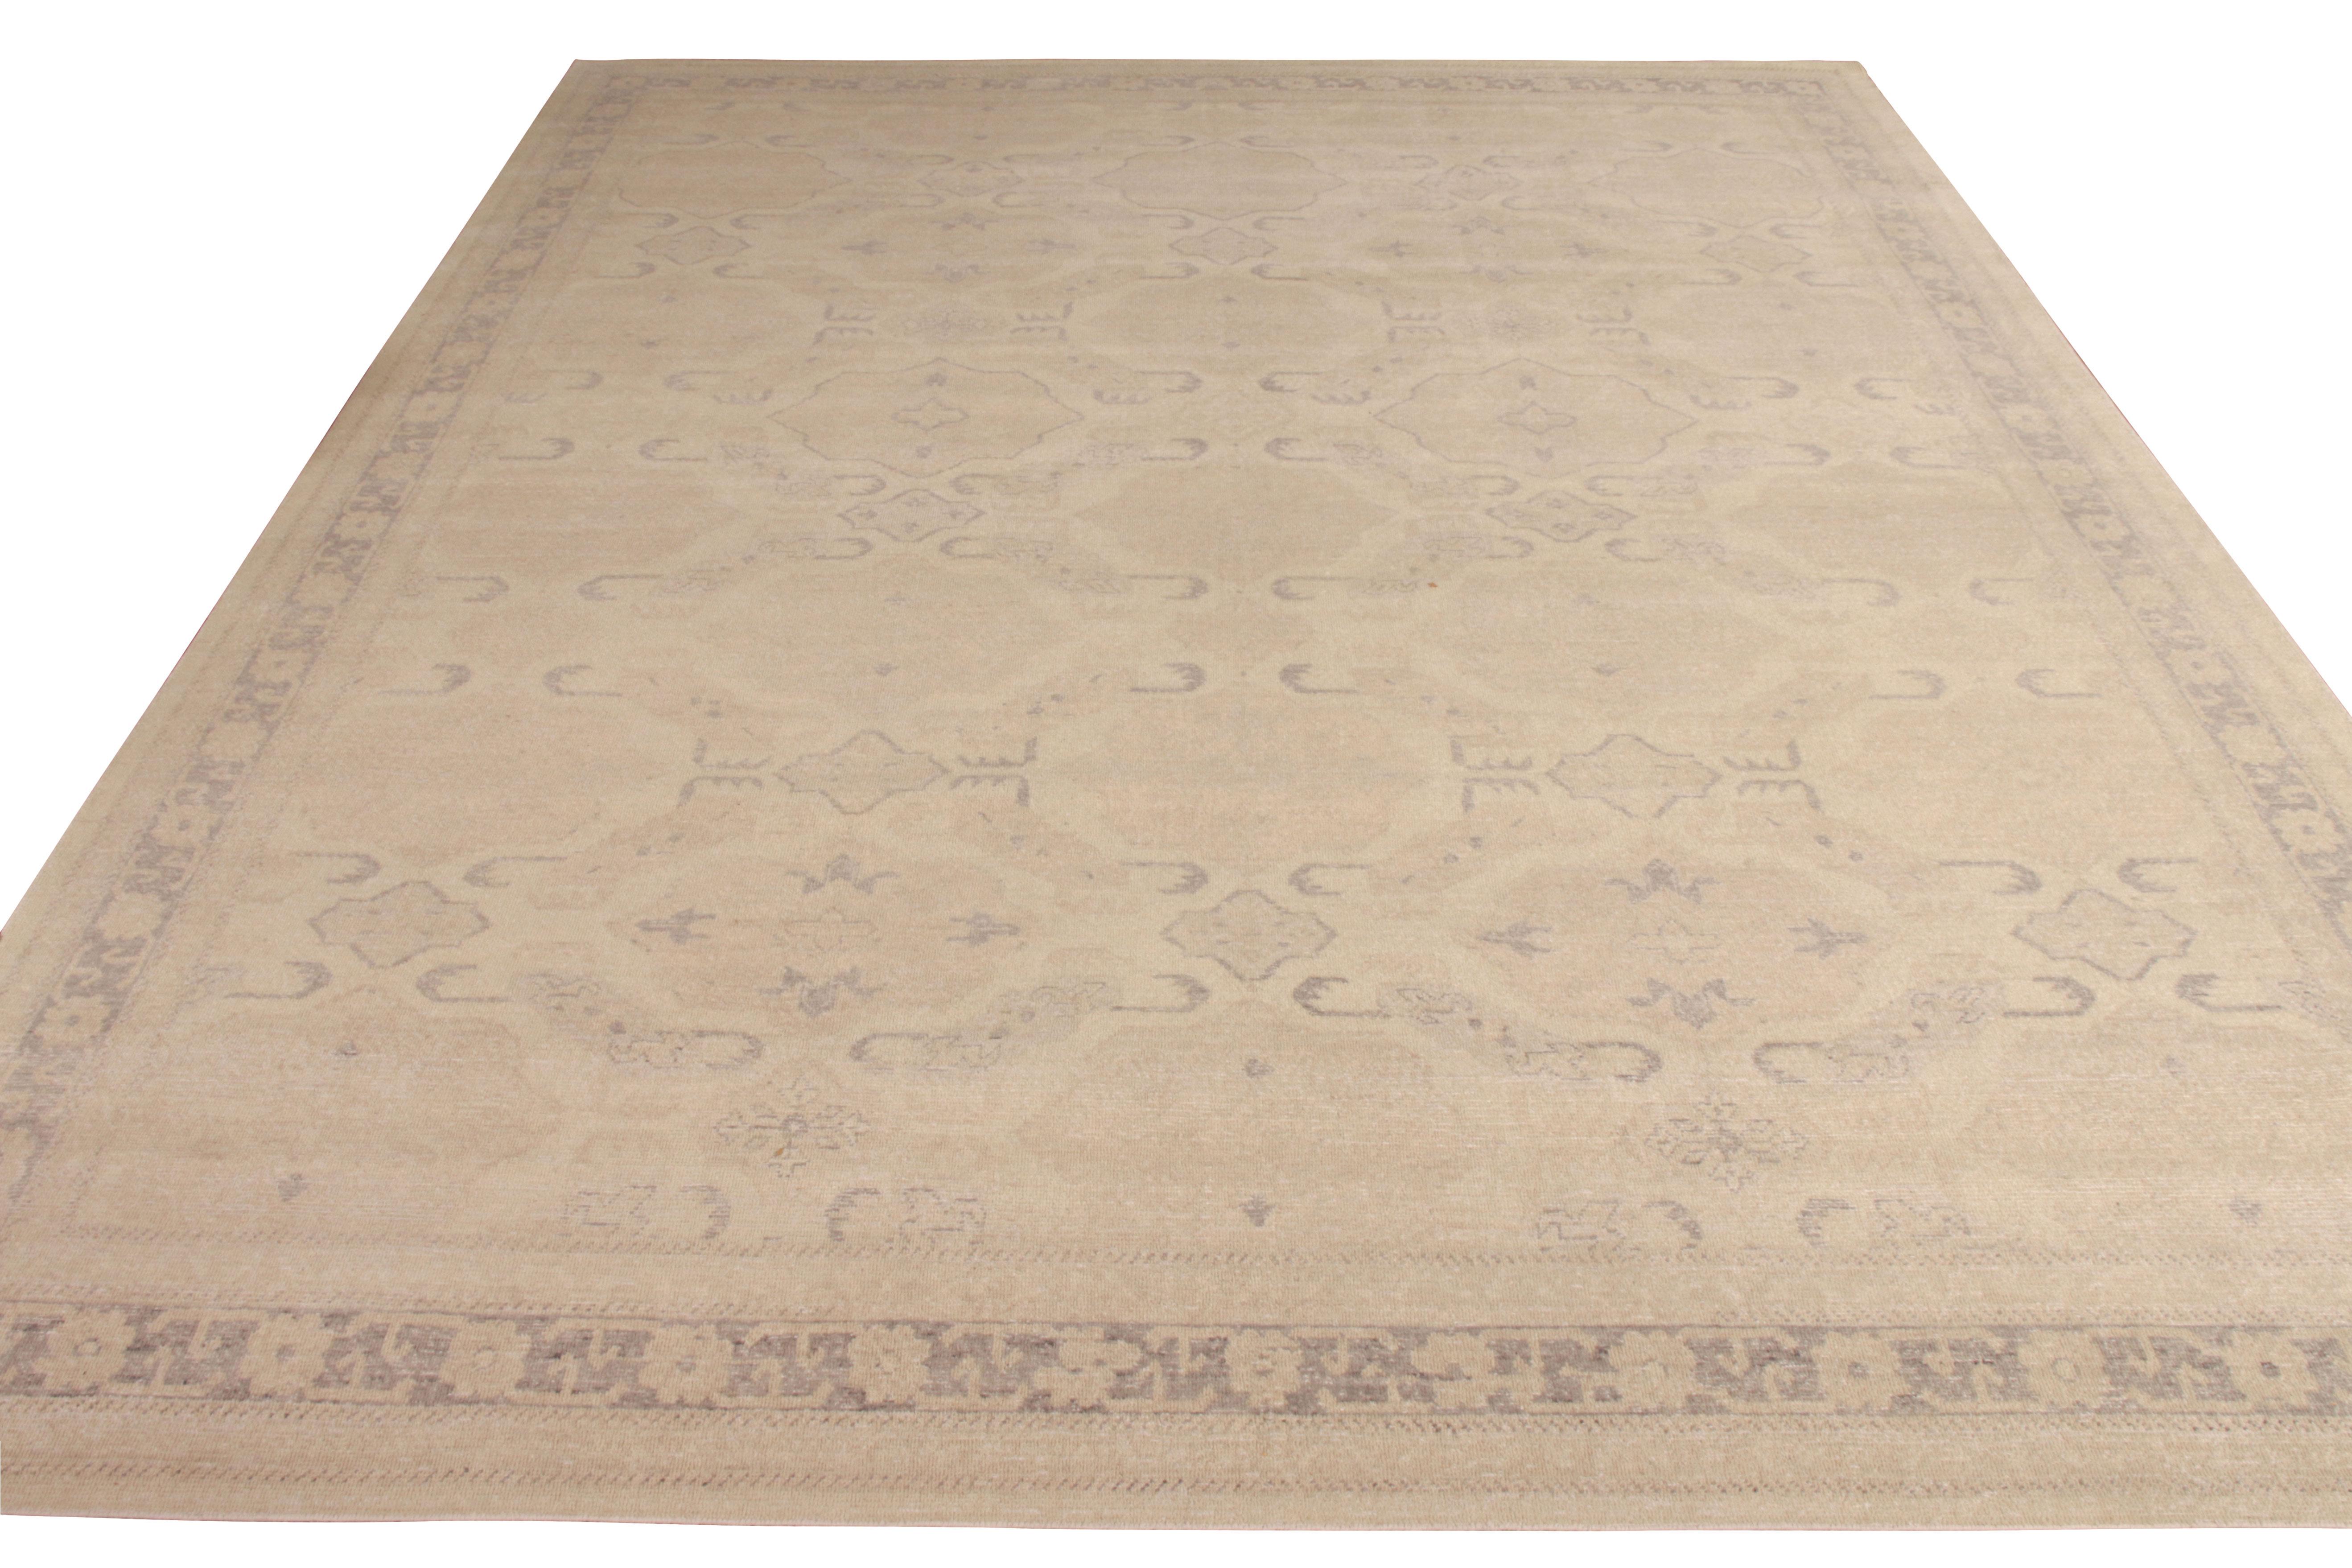 A hand knotted wool 12 x 15 rug with shabby chic appeal joining Rug & Kilim’s distressed-style Homage Collection. Drawing inspiration from classic, traditional designs, the rug enjoys an elegant geometric pattern sitting beautifully on the ivory,